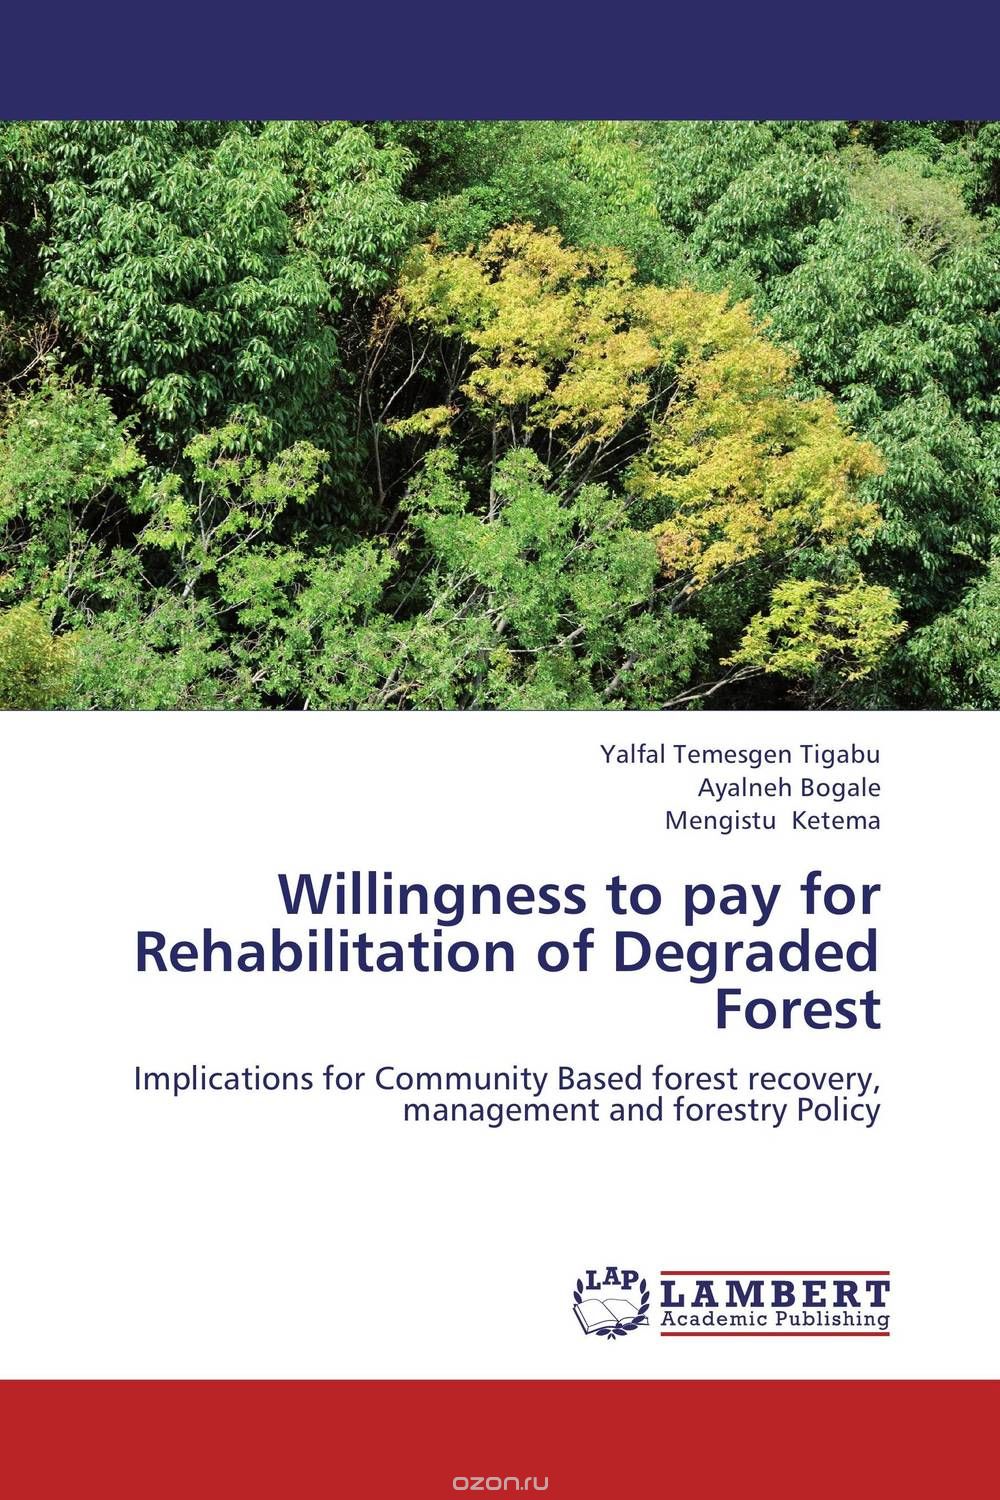 Скачать книгу "Willingness to pay for Rehabilitation of Degraded Forest"